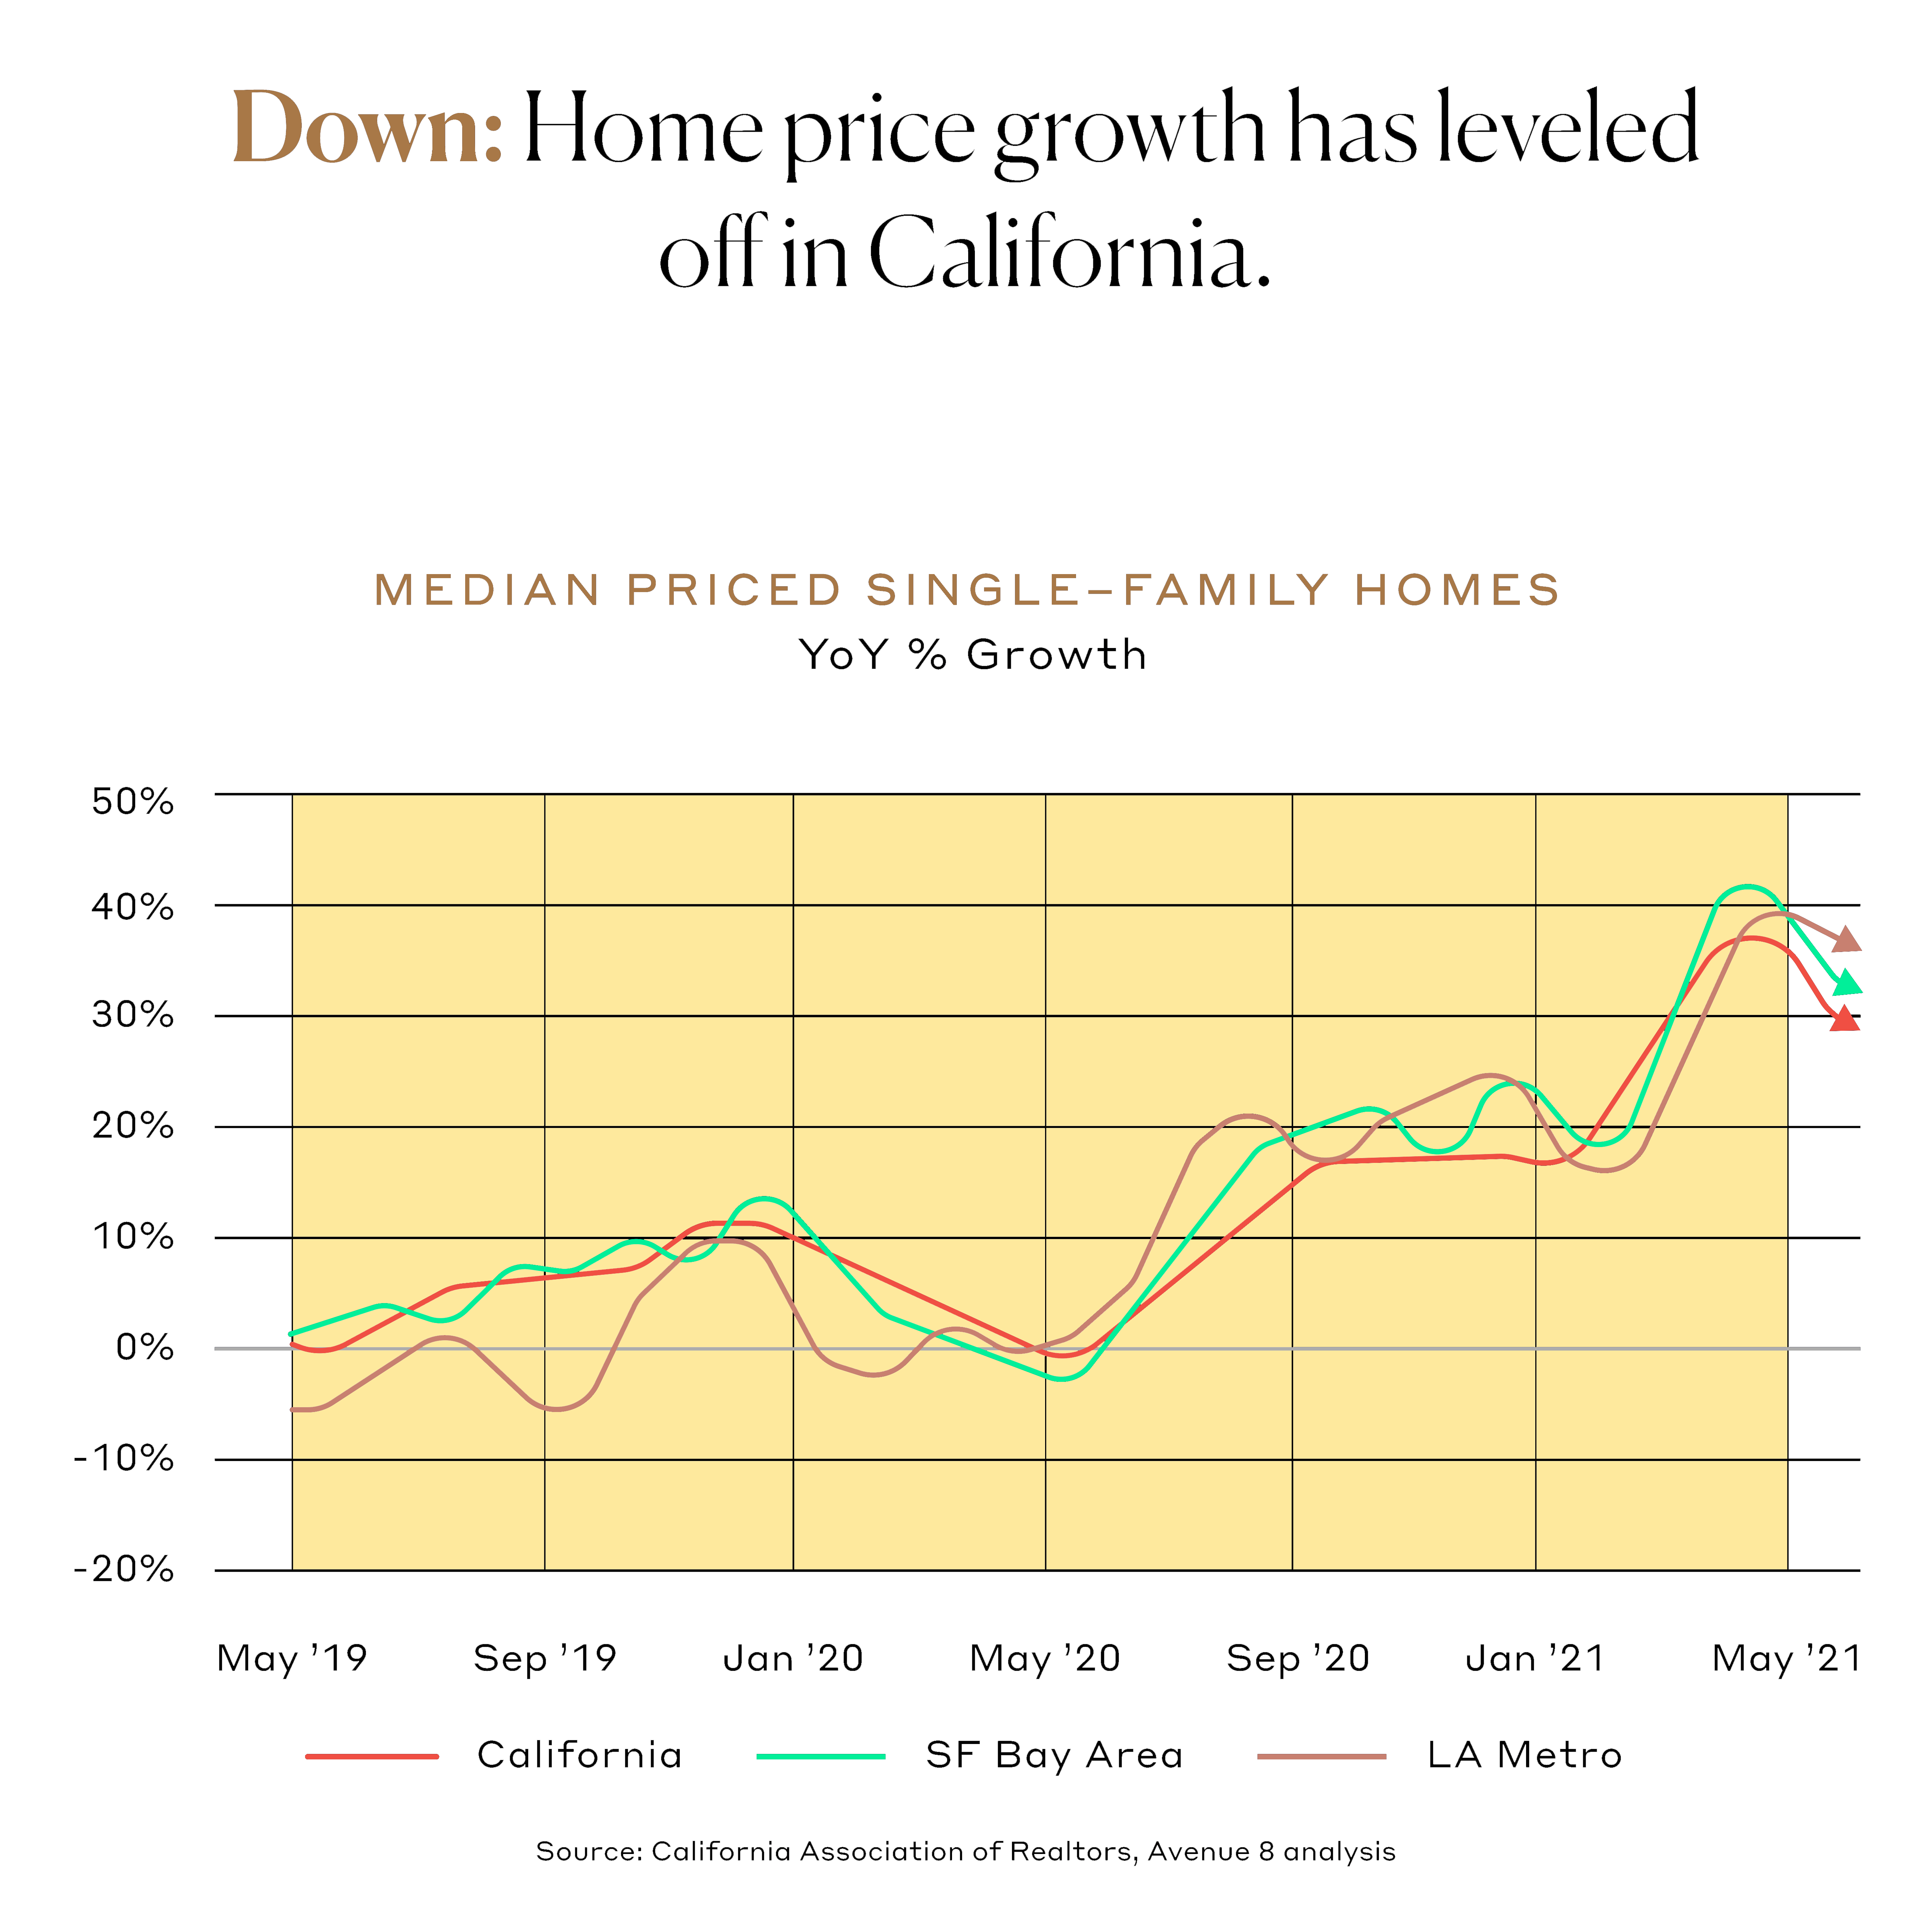 Down: Home price growth has leveled off in California.